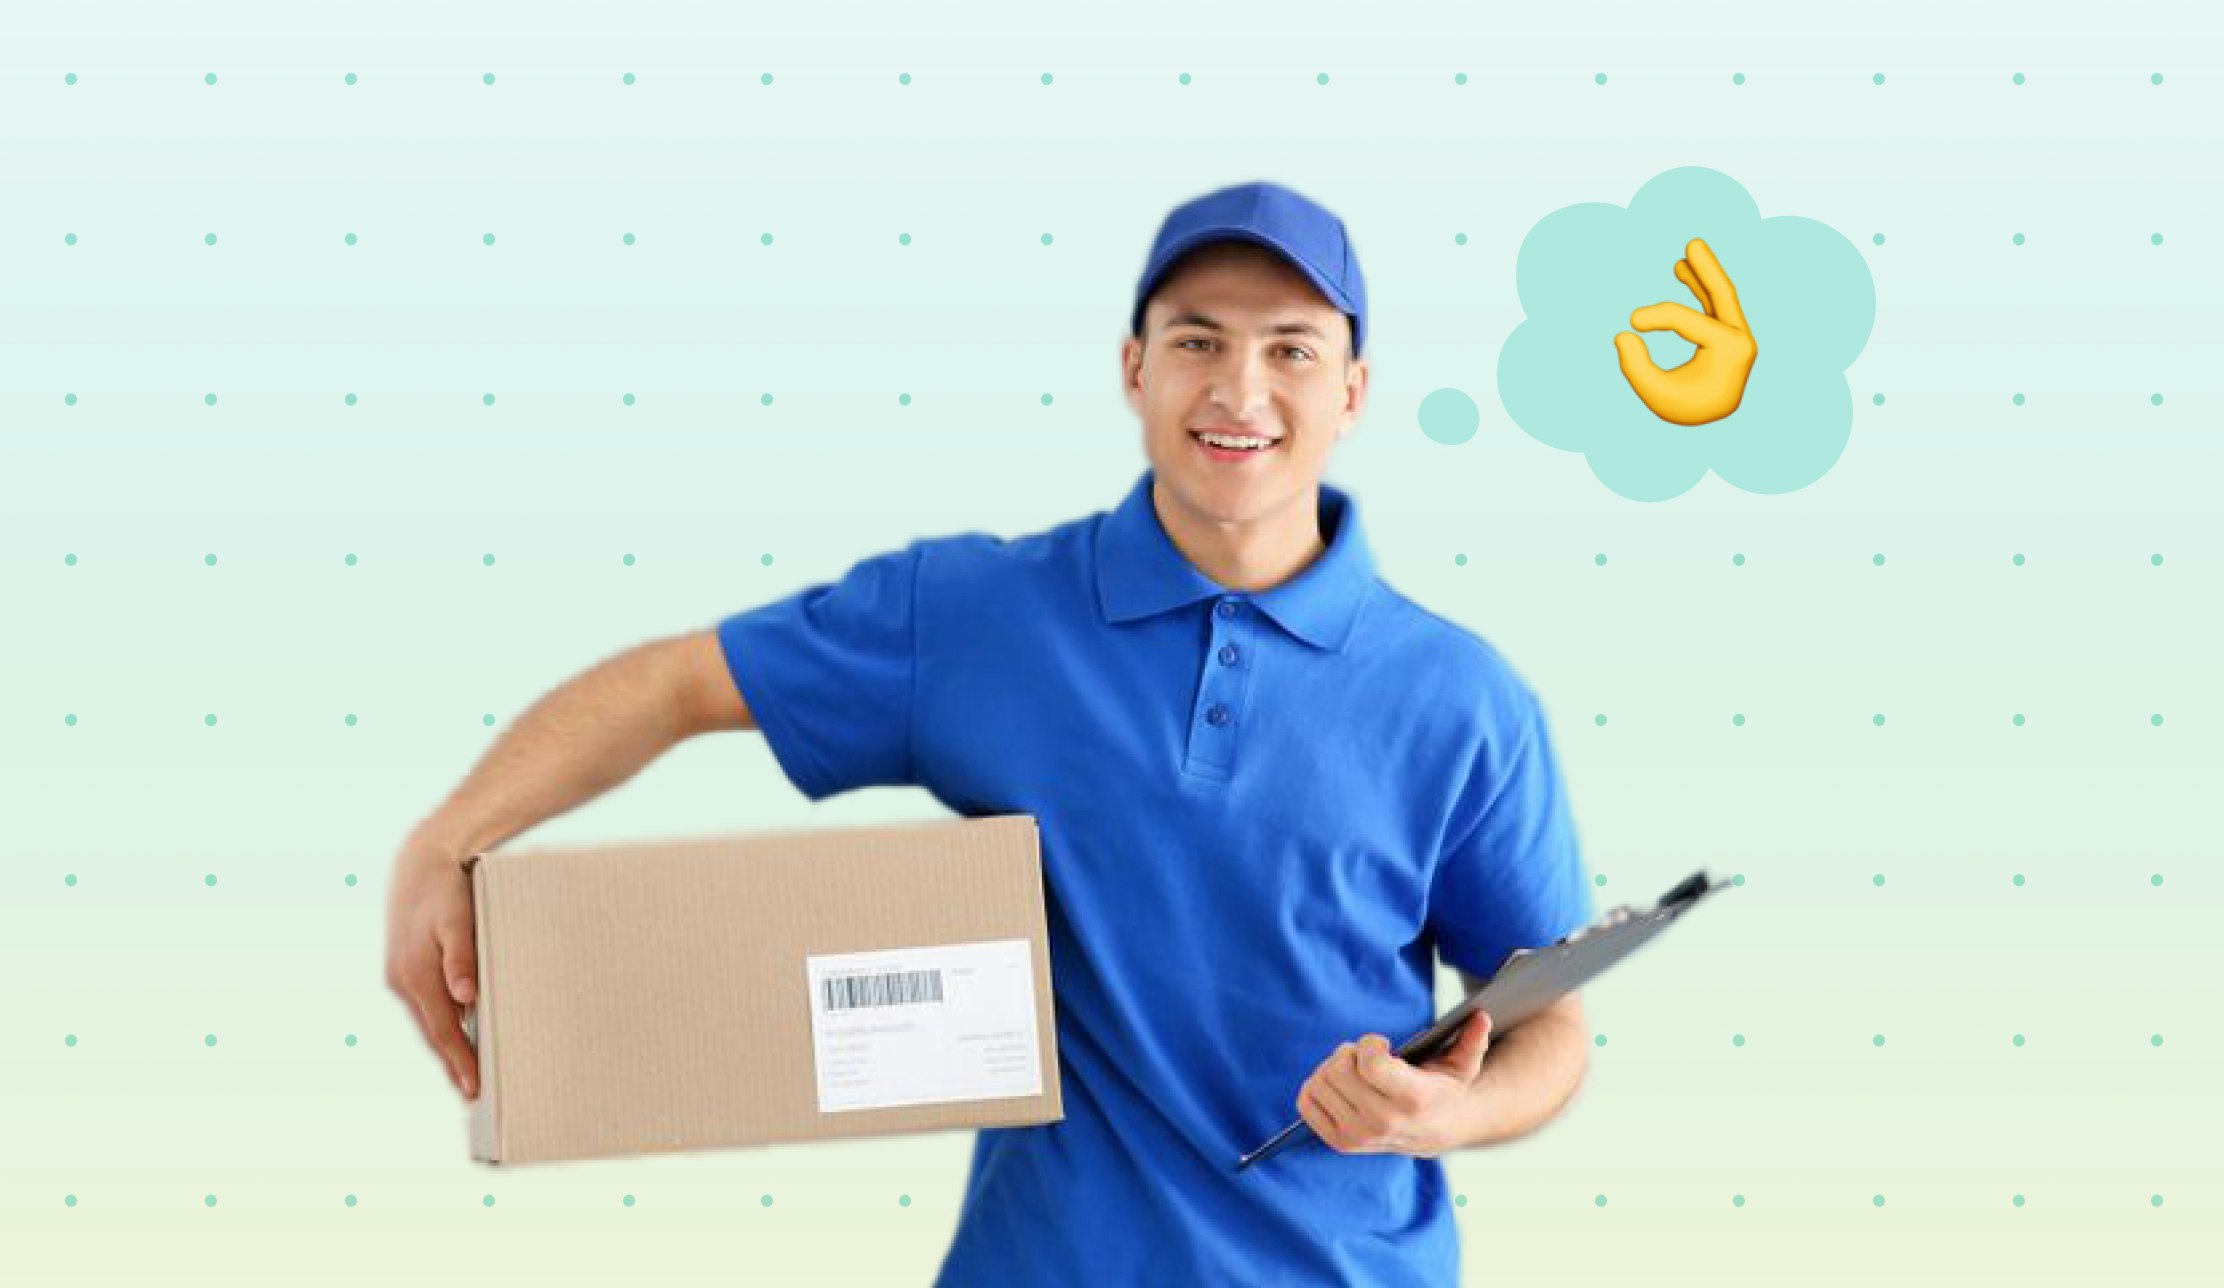 delivery man with box